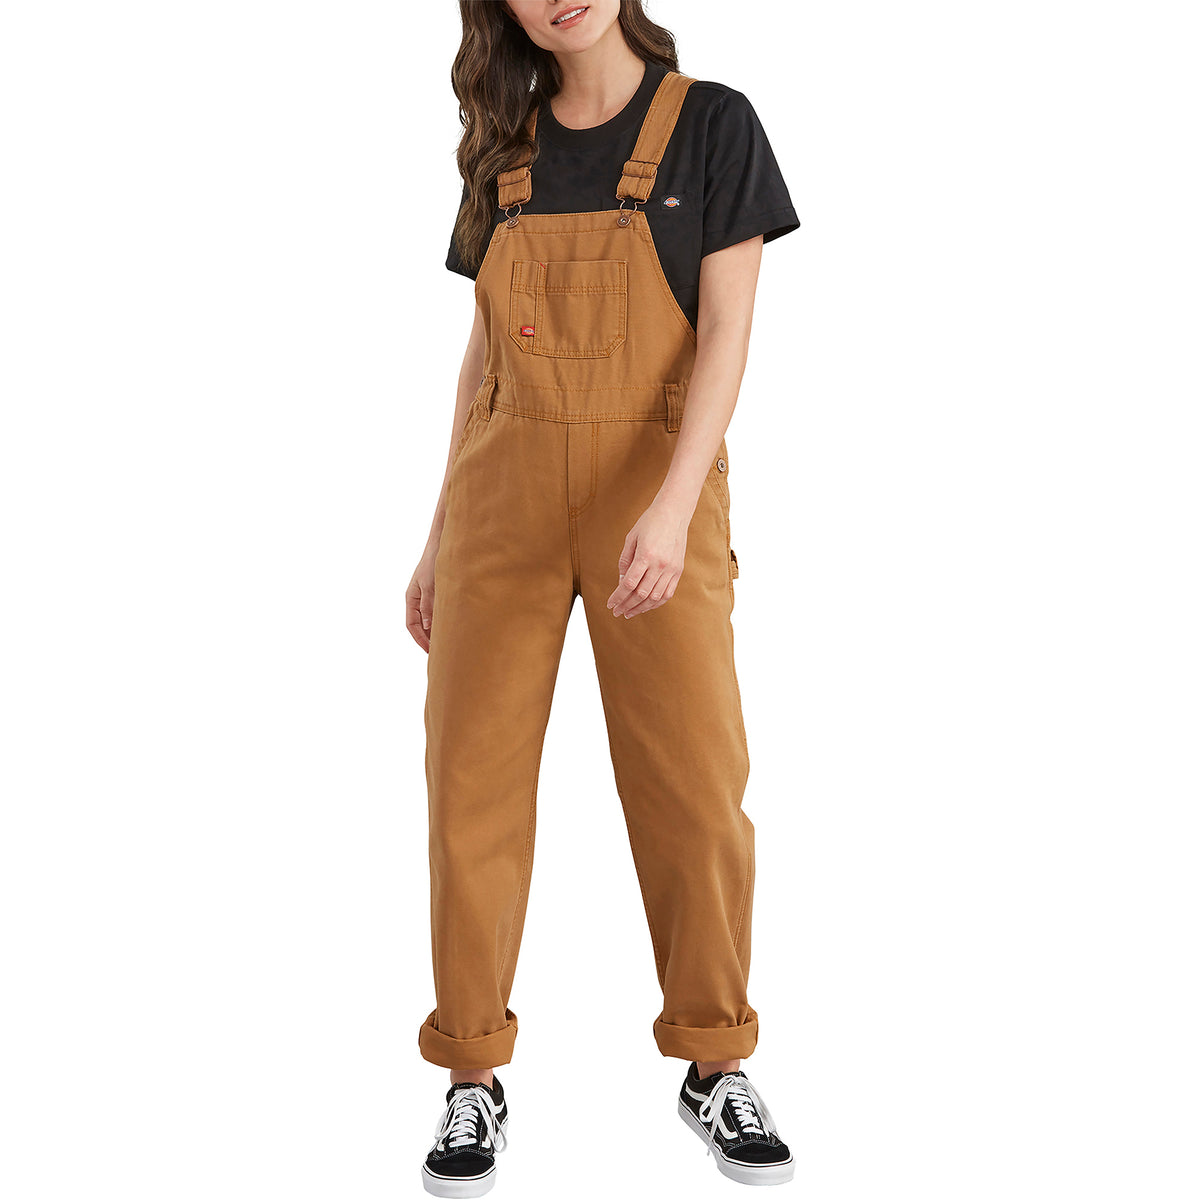 Dickies womens Women's Relaxed Fit Bib Overalls, Rinsed Moss Green